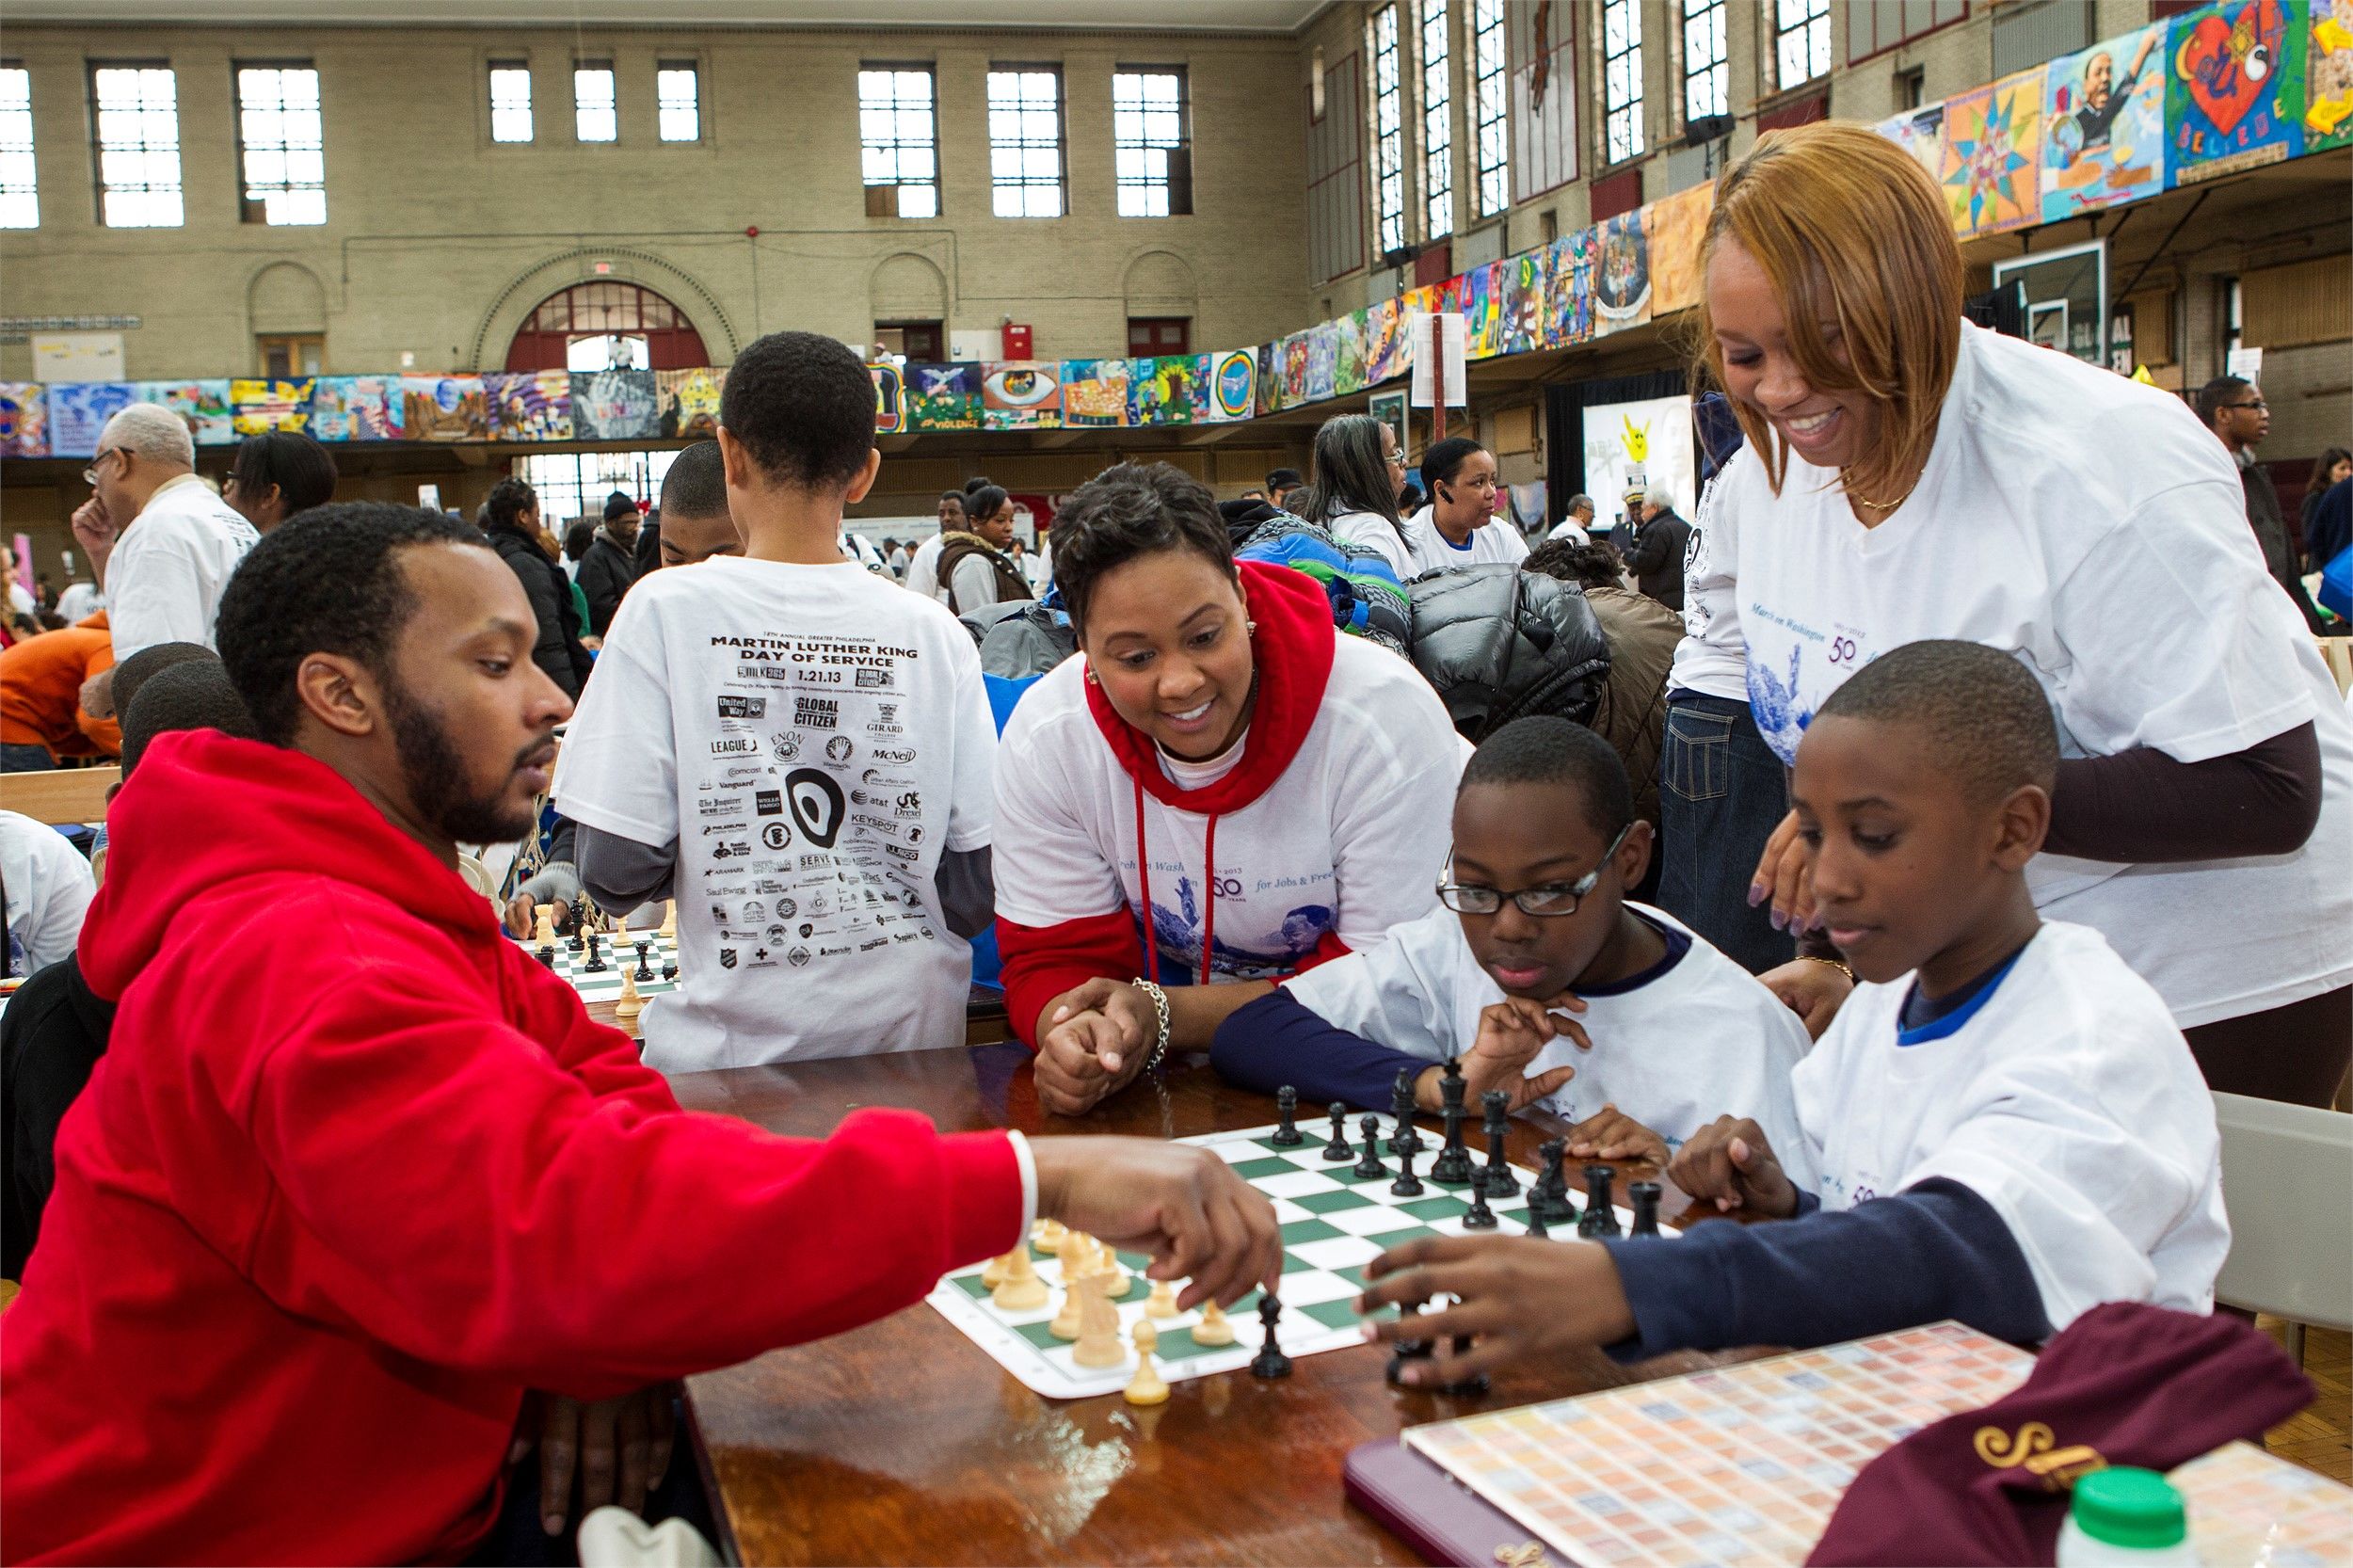 student teachers and their students playing chess together.